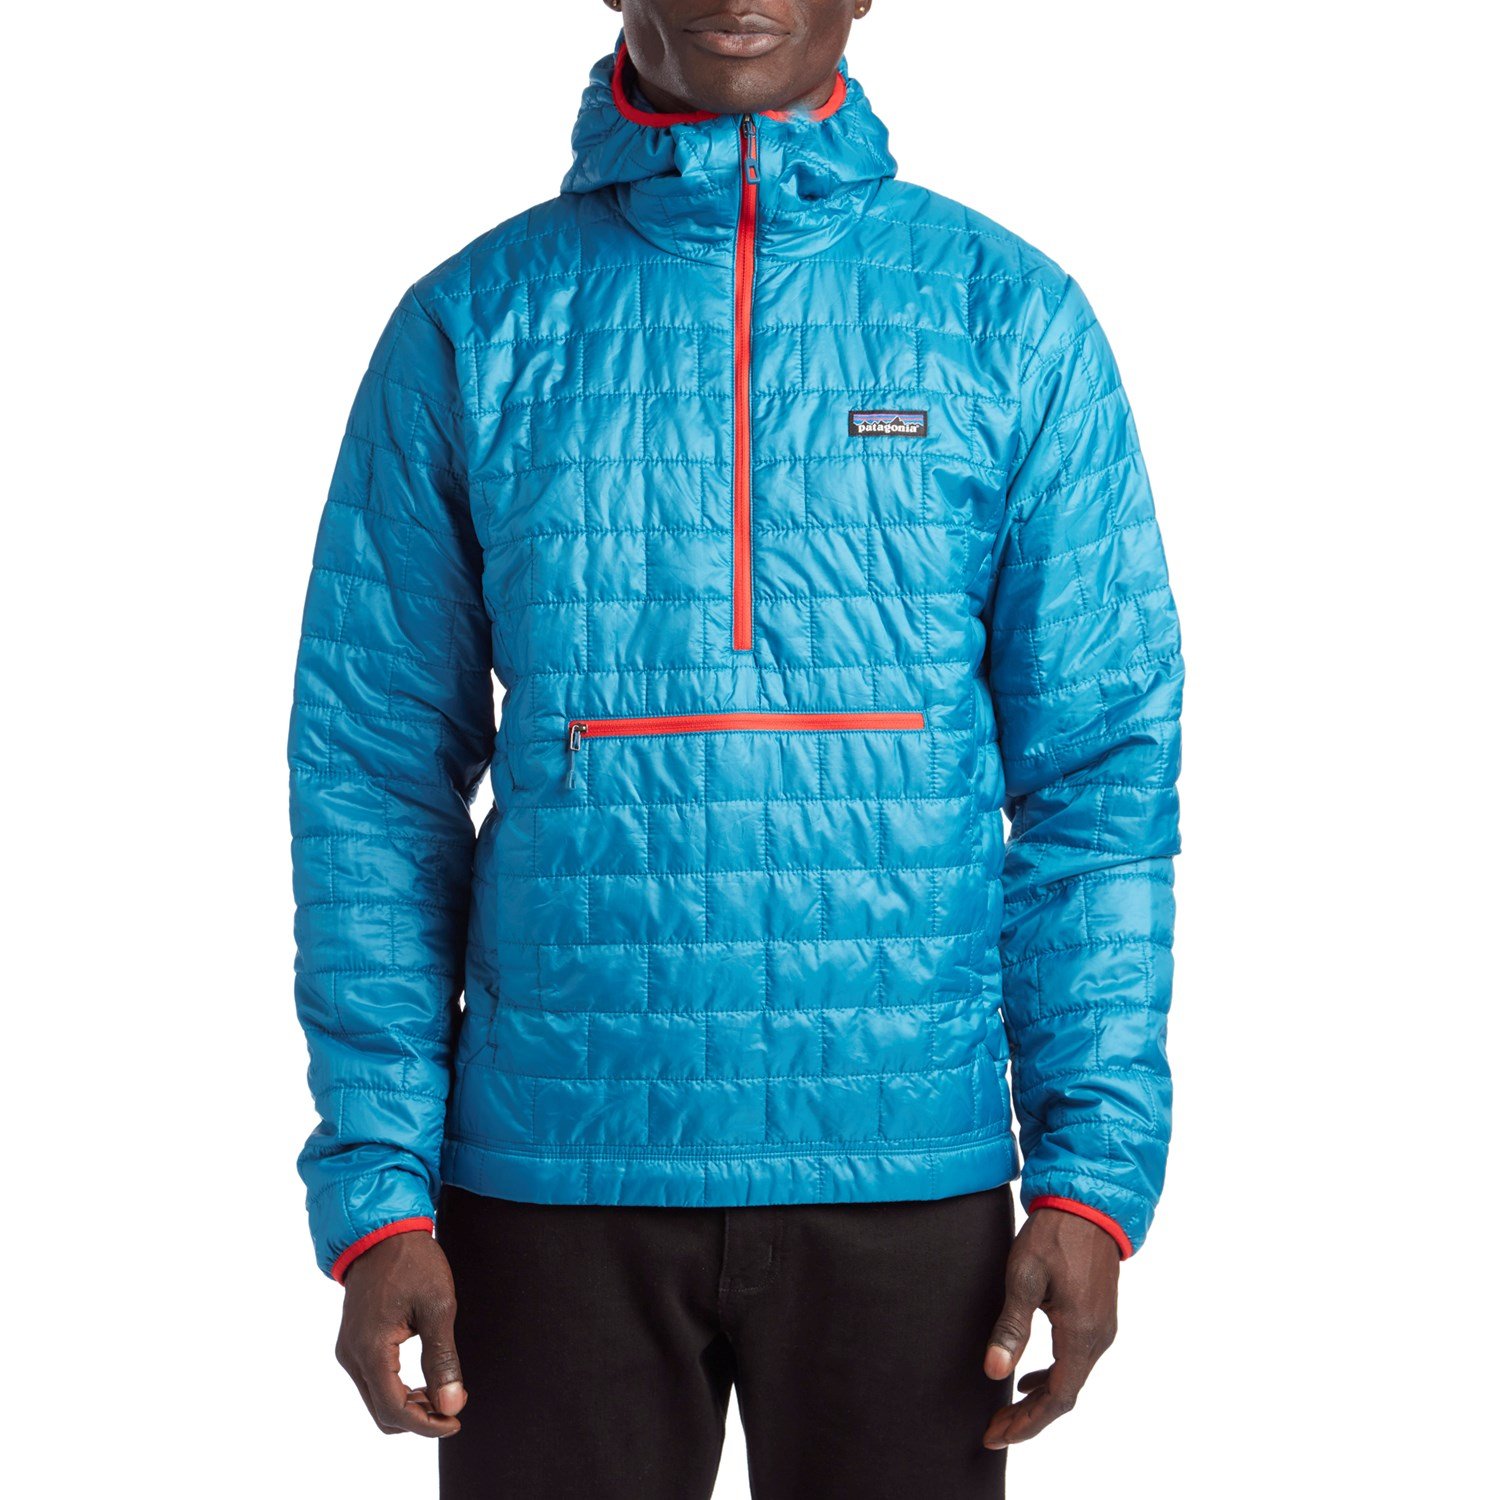 Scully inspanning Slank Patagonia Nano Puff™ Bivy Pull-Over Jacket | evo